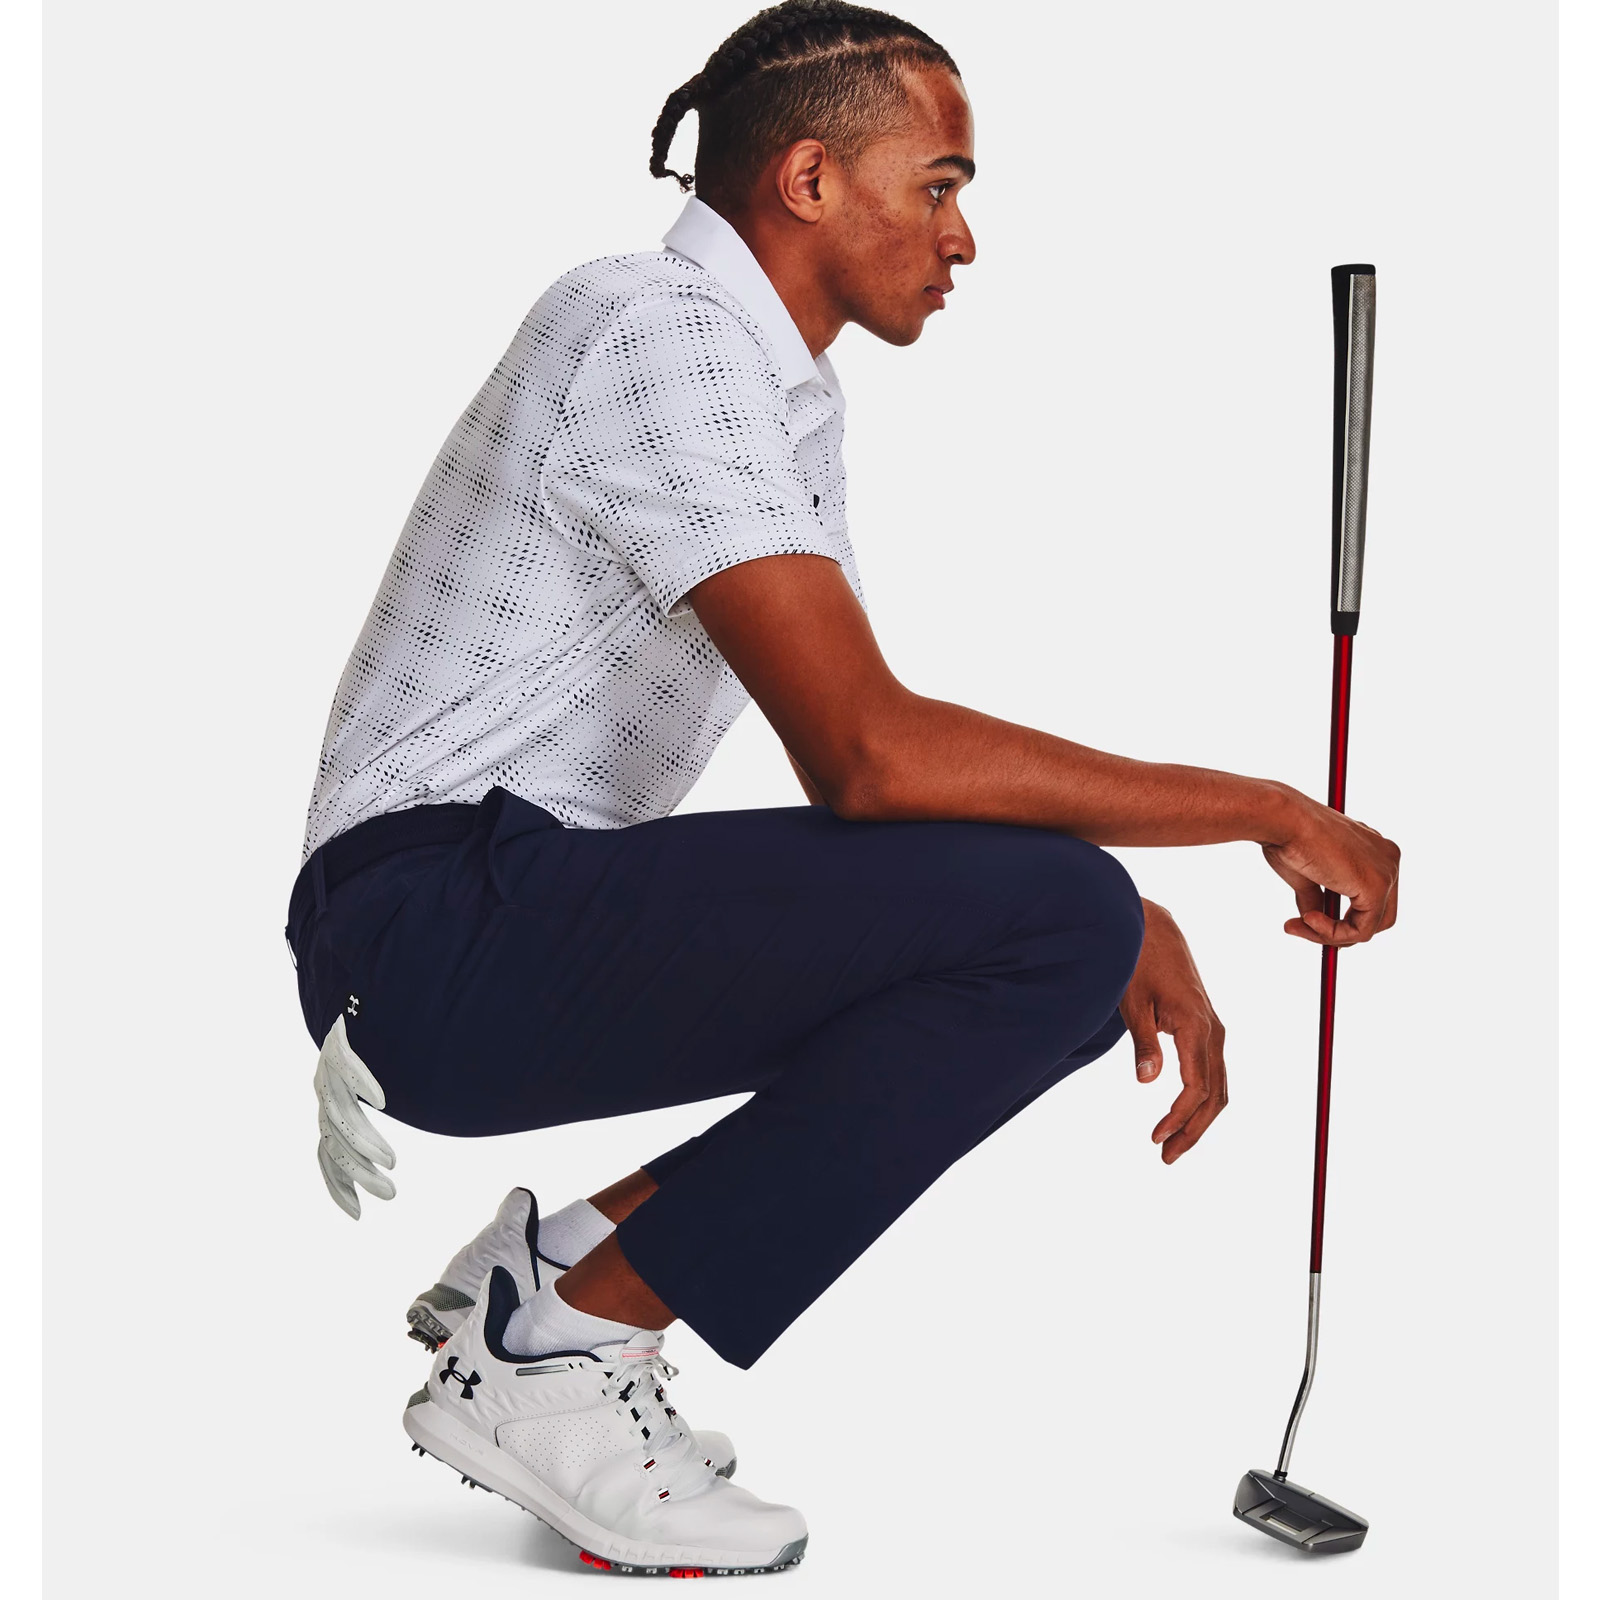 Under Armour Mens UA Drive Tapered Golf Trousers 